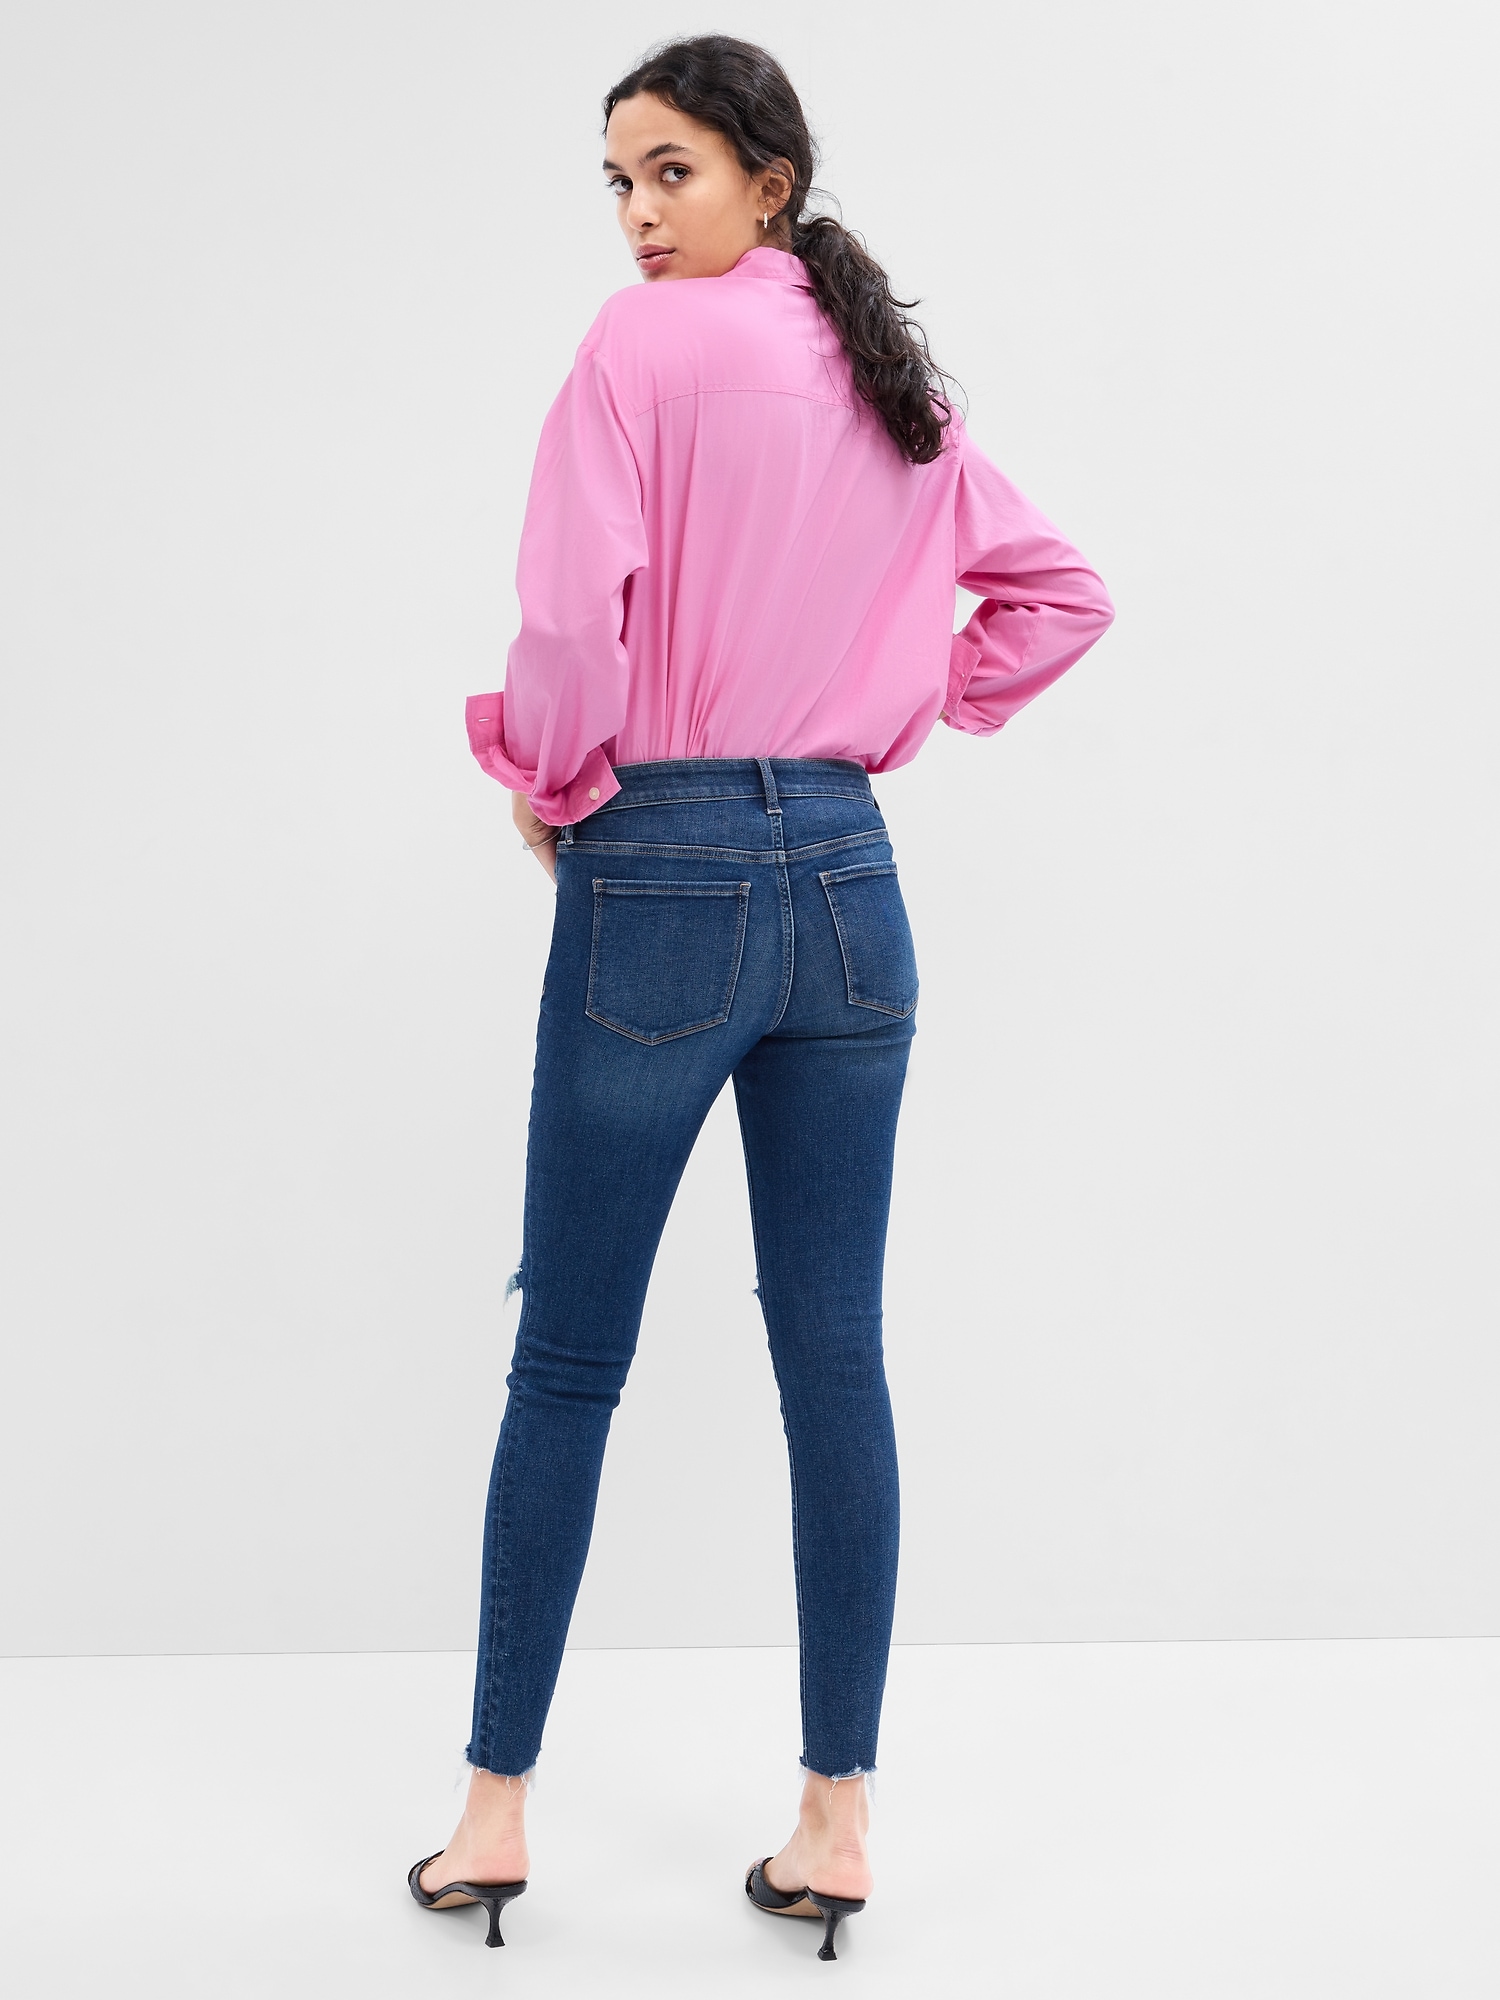 Mid Rise Universal Legging Jeans by Gap Online, THE ICONIC